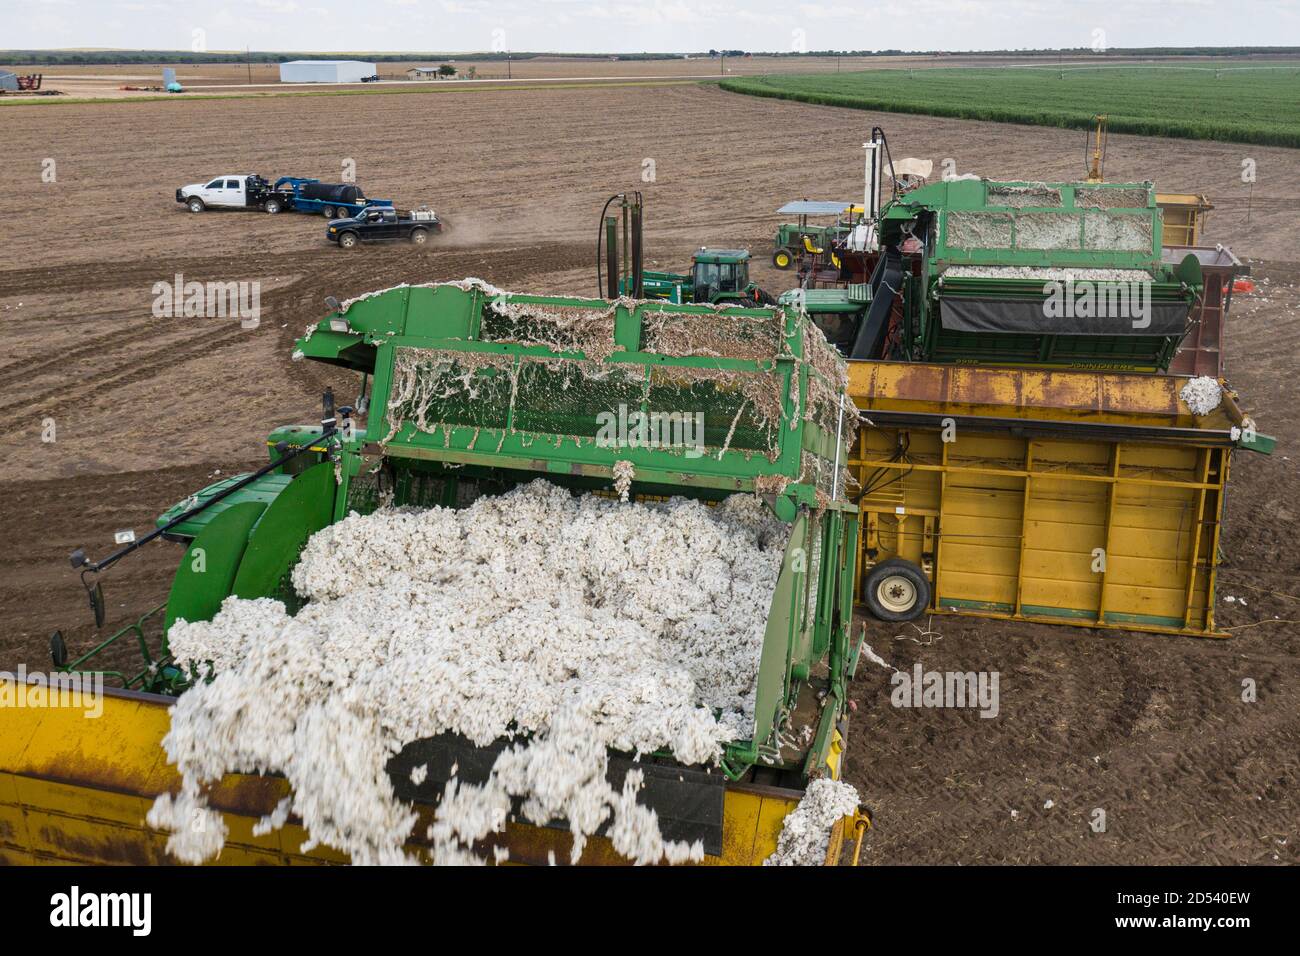 A speciality harvester unloads cotton bolls into a cotton module builders at his the Schirmer Farm during the cotton harvest August 25, 2020 in Batesville, Texas. Stock Photo